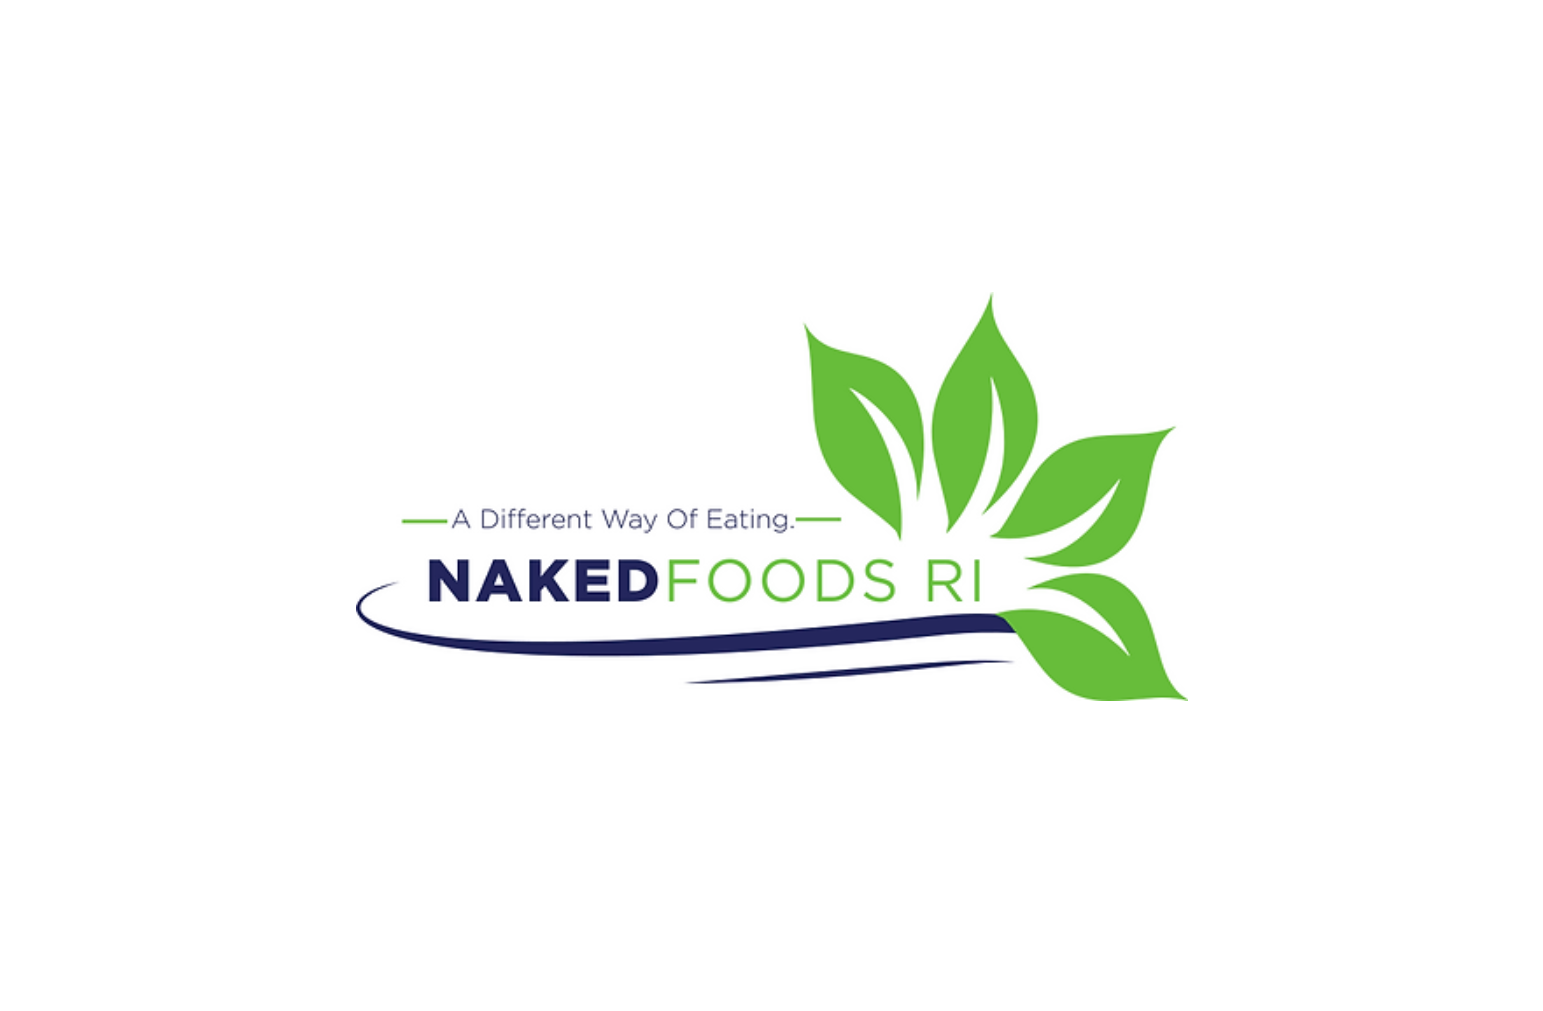 Healthy Food Made Easy - Naked Foods RI